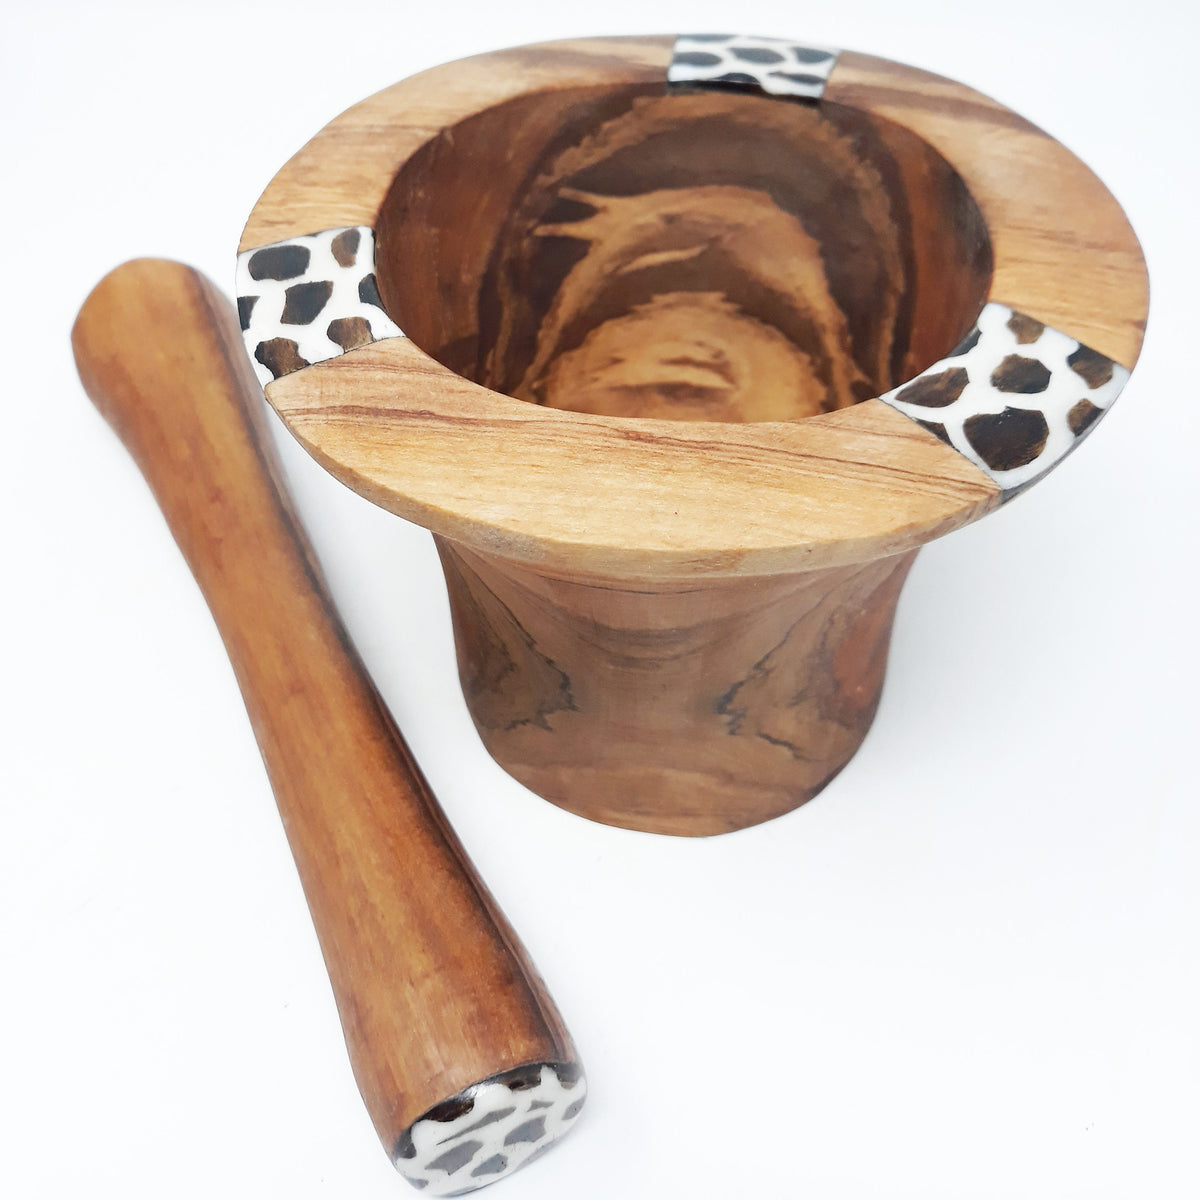 Traditional Olive Wood Pestle and Mortar, wooden Mortar &amp; Pestle, Wooden Spice Grinder, Wooden Pestle and Mortar, chef kitchen gift